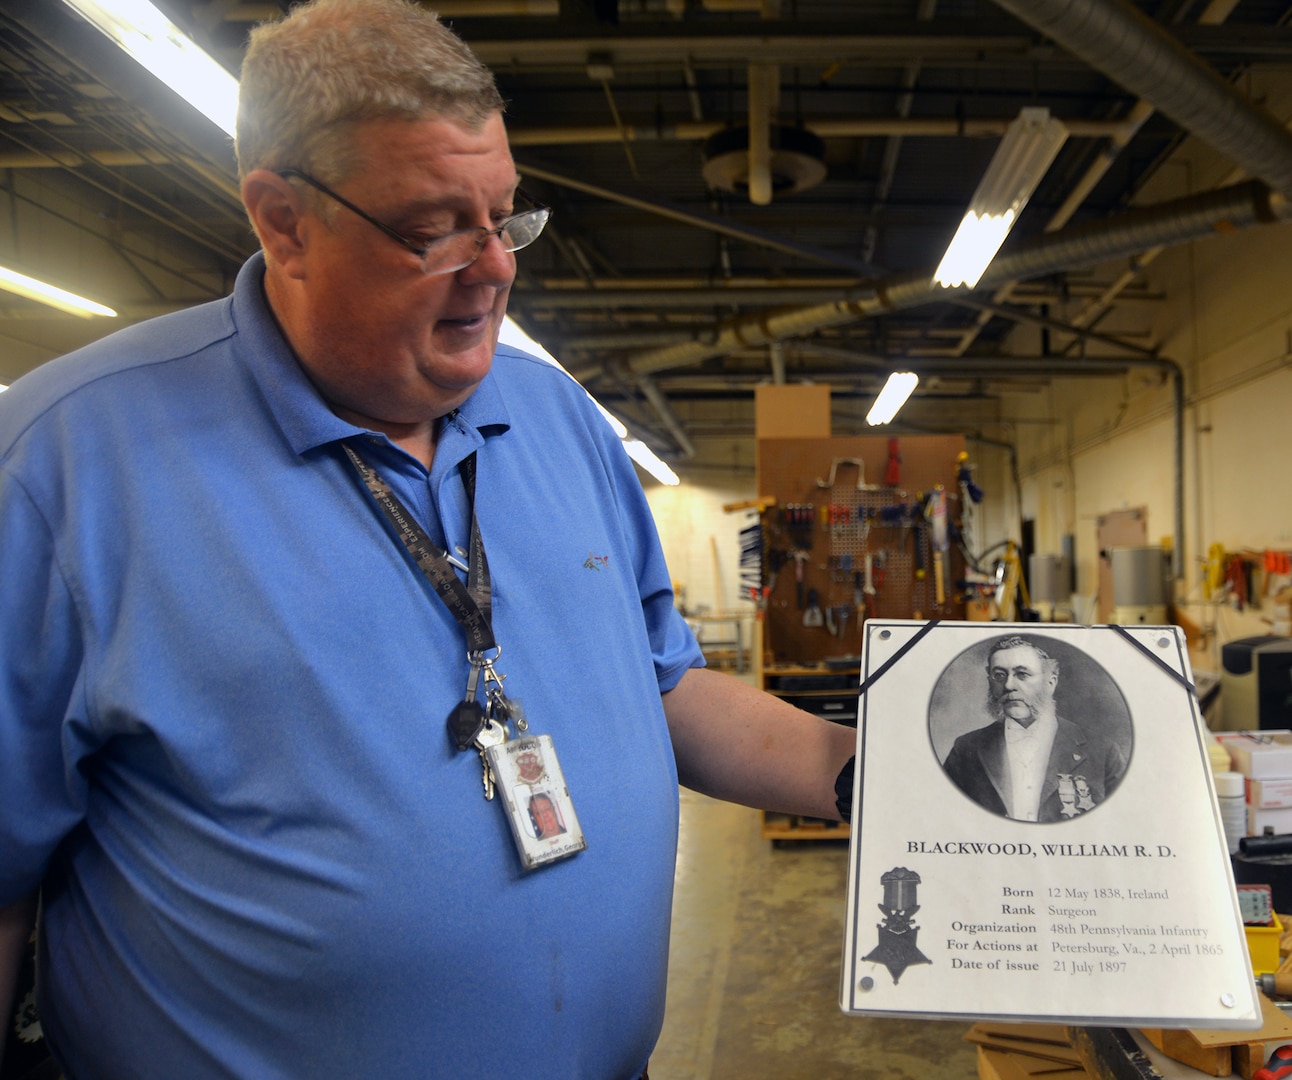 George Wunderlich, U.S. Army Medical Department Museum director, holds a model of a photo and text that will be placed in a new exhibit at the museum dedicated to the 52 Medal of Honor recipients who served in the U.S. Army Medical Department. Wunderlich is hoping the new exhibit, which will be placed in the main hallway and foyer of the AMEDD Museum, will ready be for public viewing by June 15.